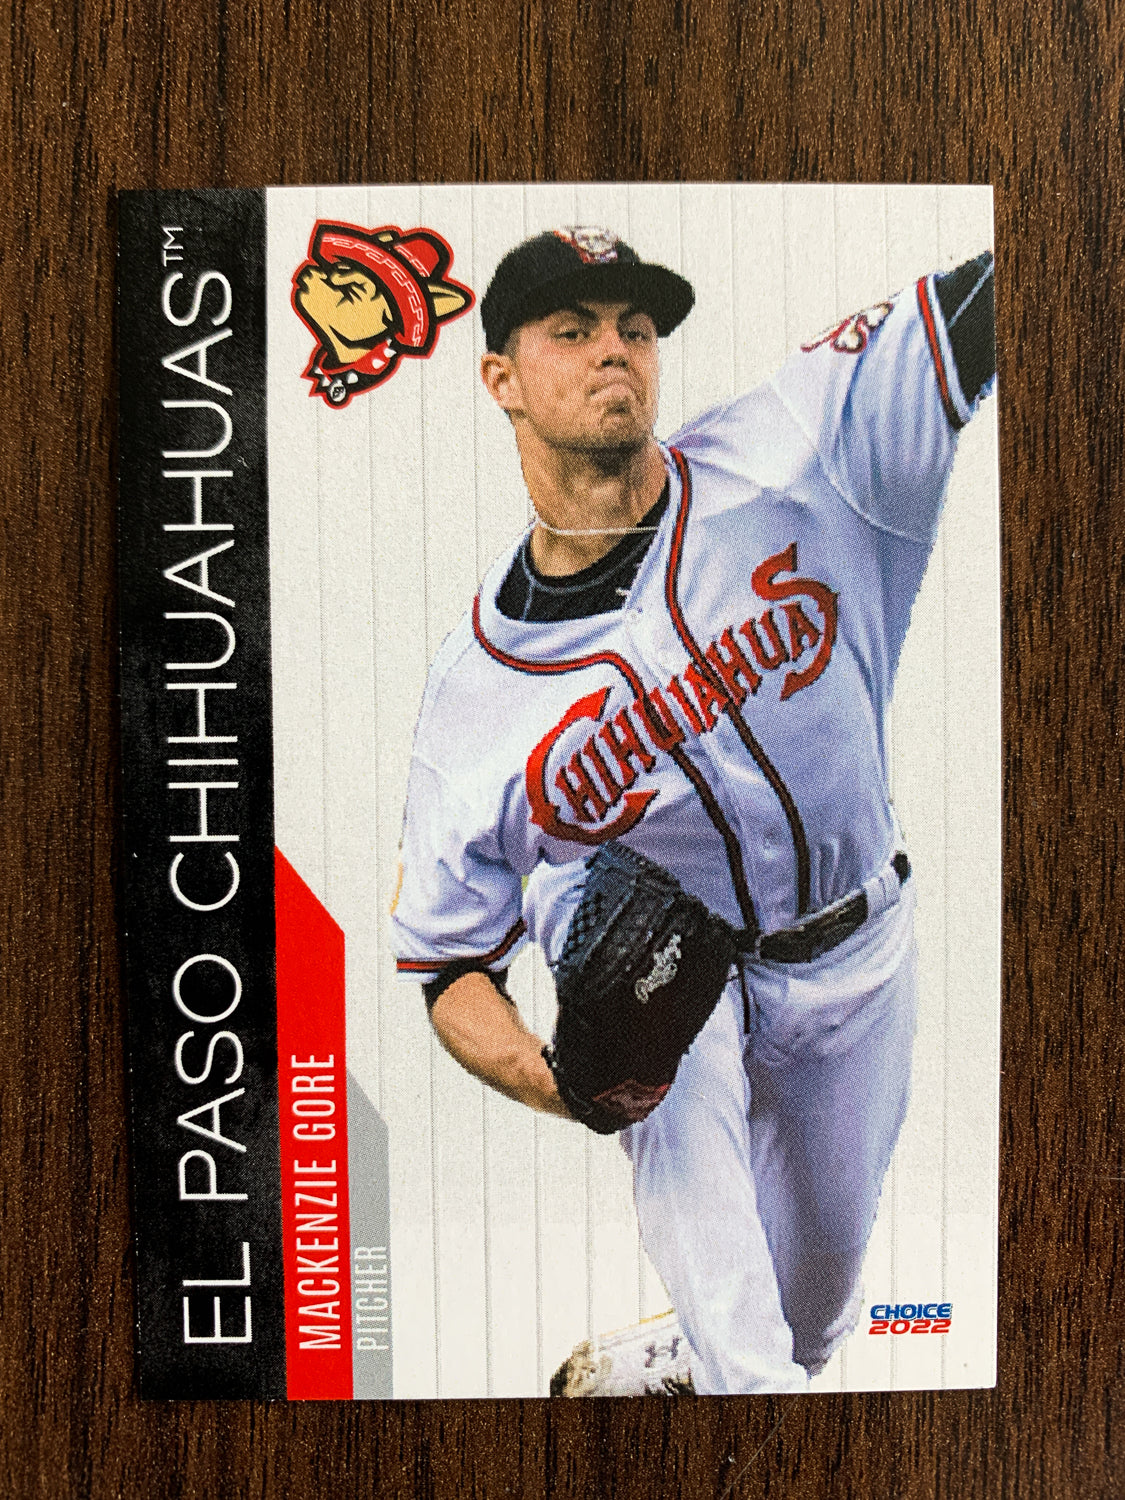 The one and only - El Paso Chihuahuas